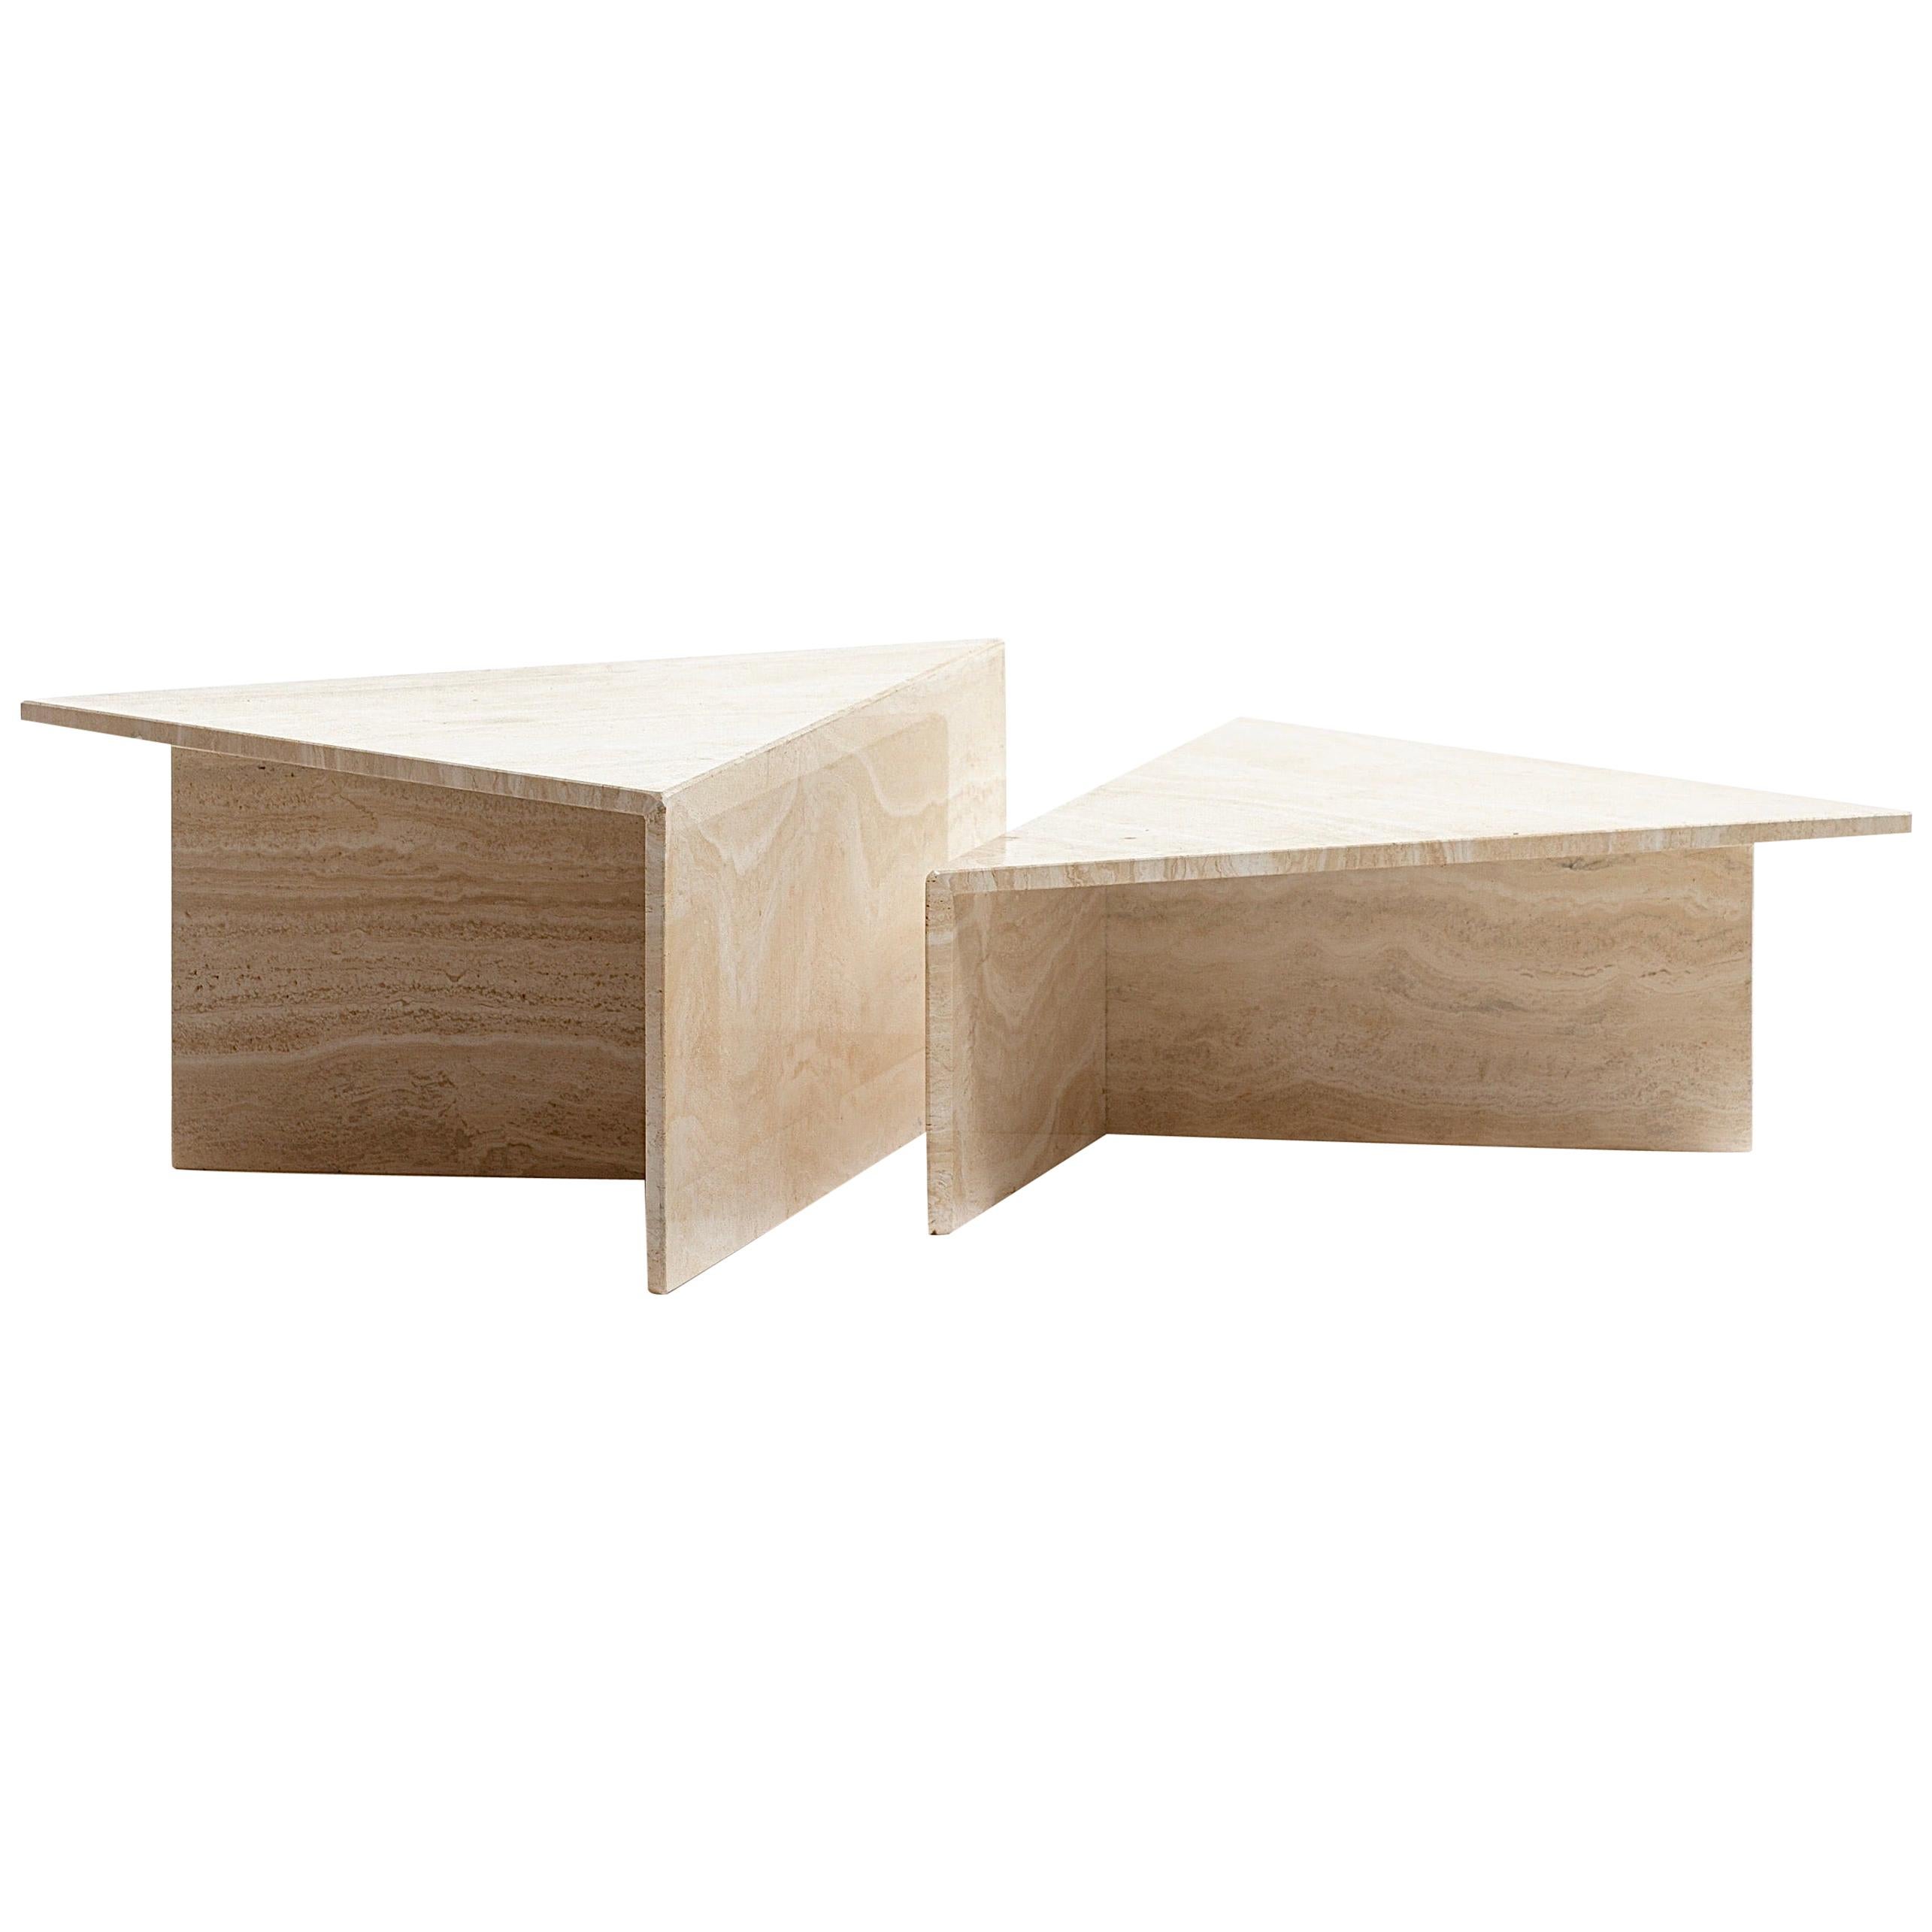 Large Italian Two Part Travertine Modular Coffee Table by Up & Up, circa 1970s